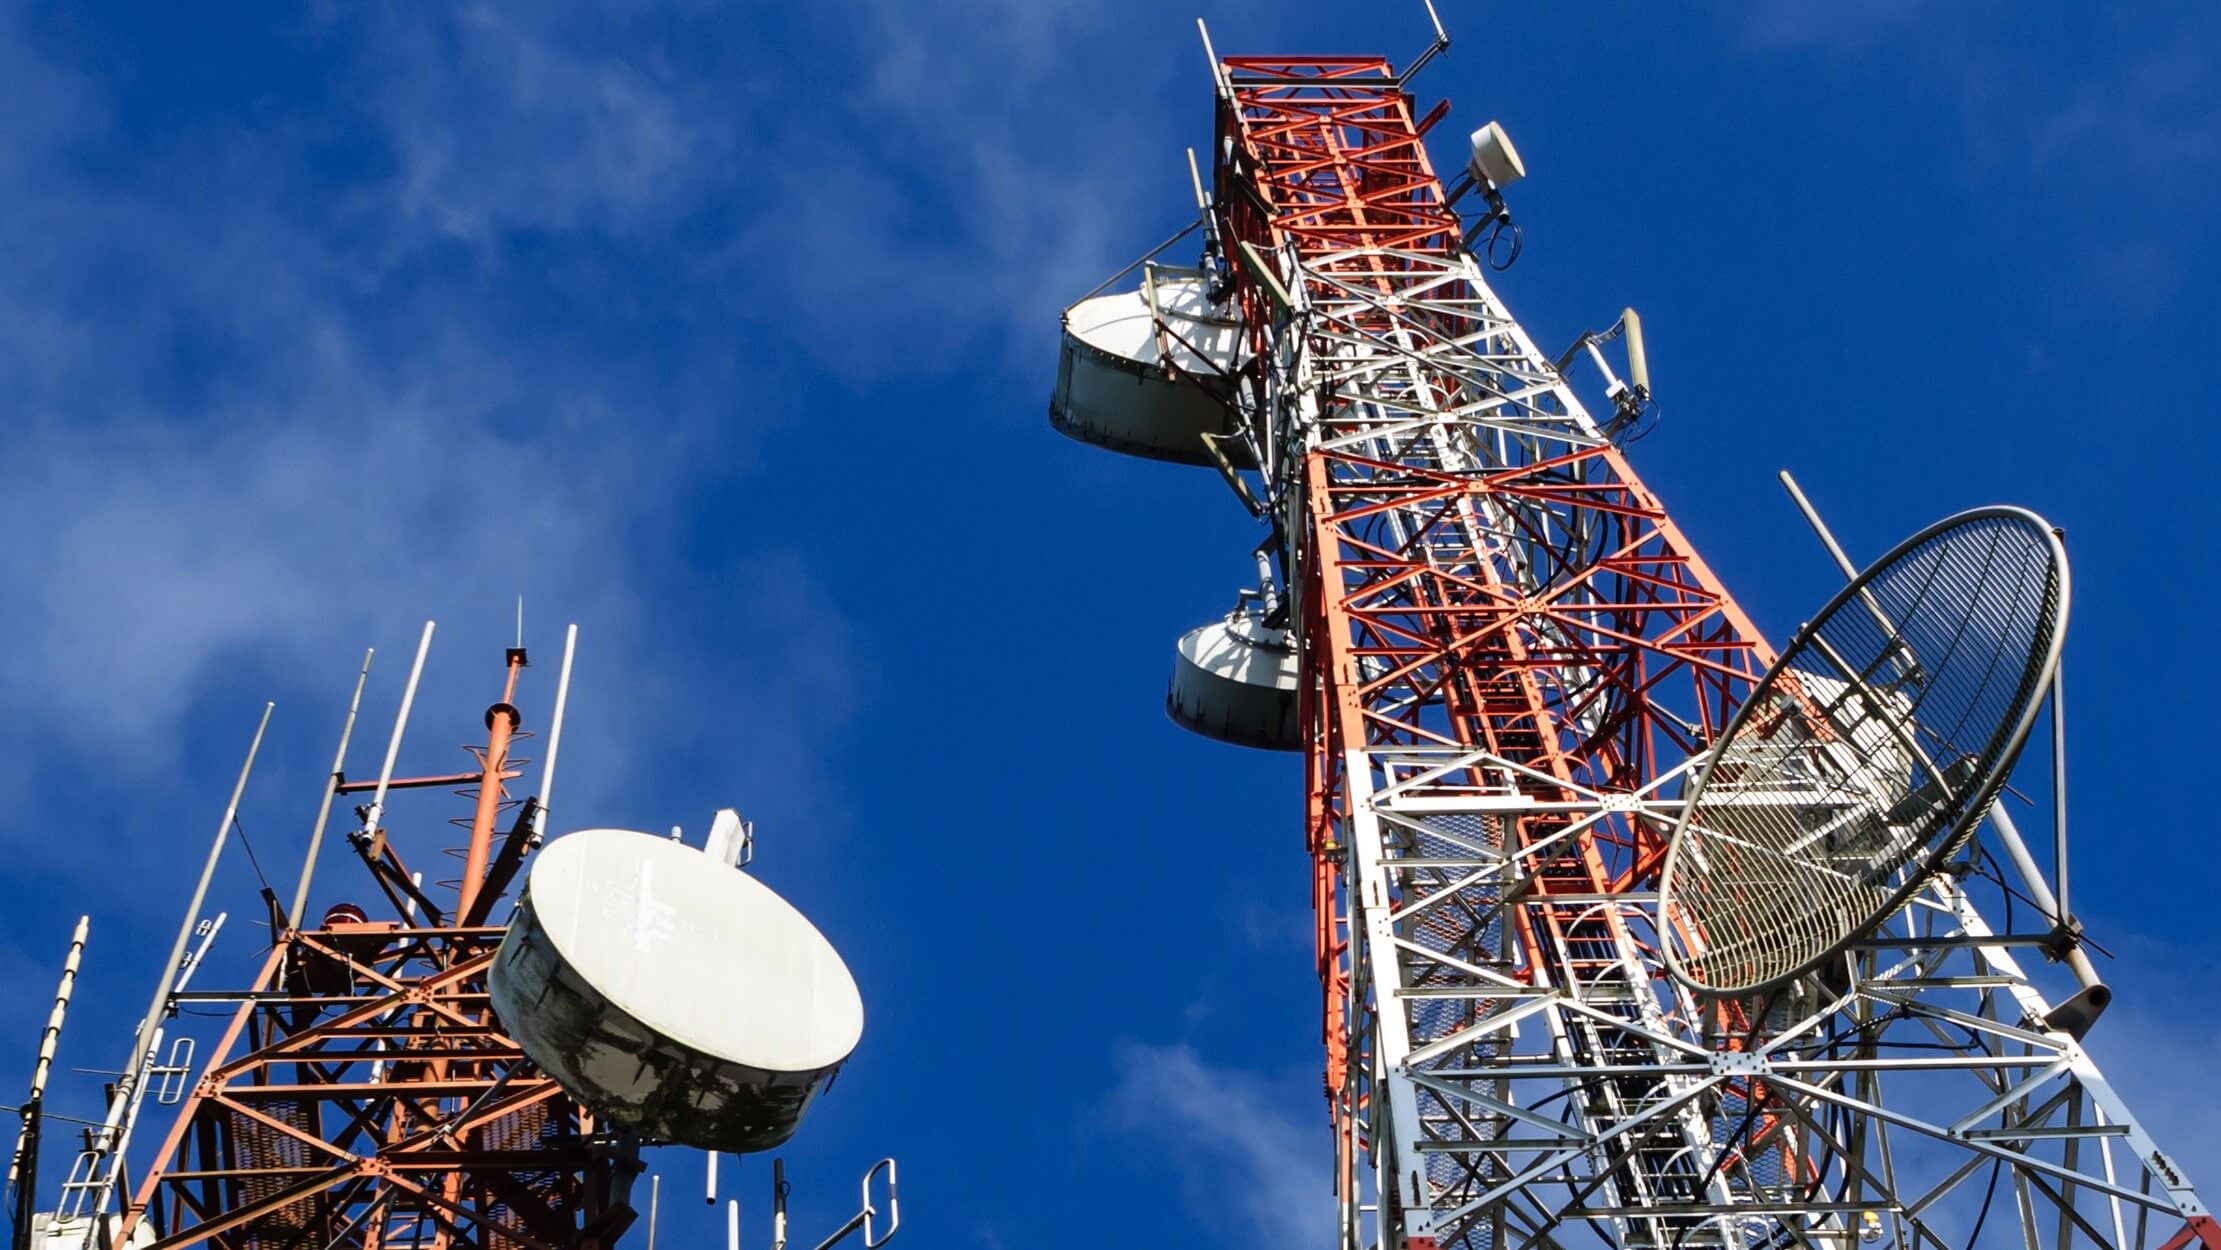 Telecoms attracts $57.7 Million Capital Importation in Q1 2022